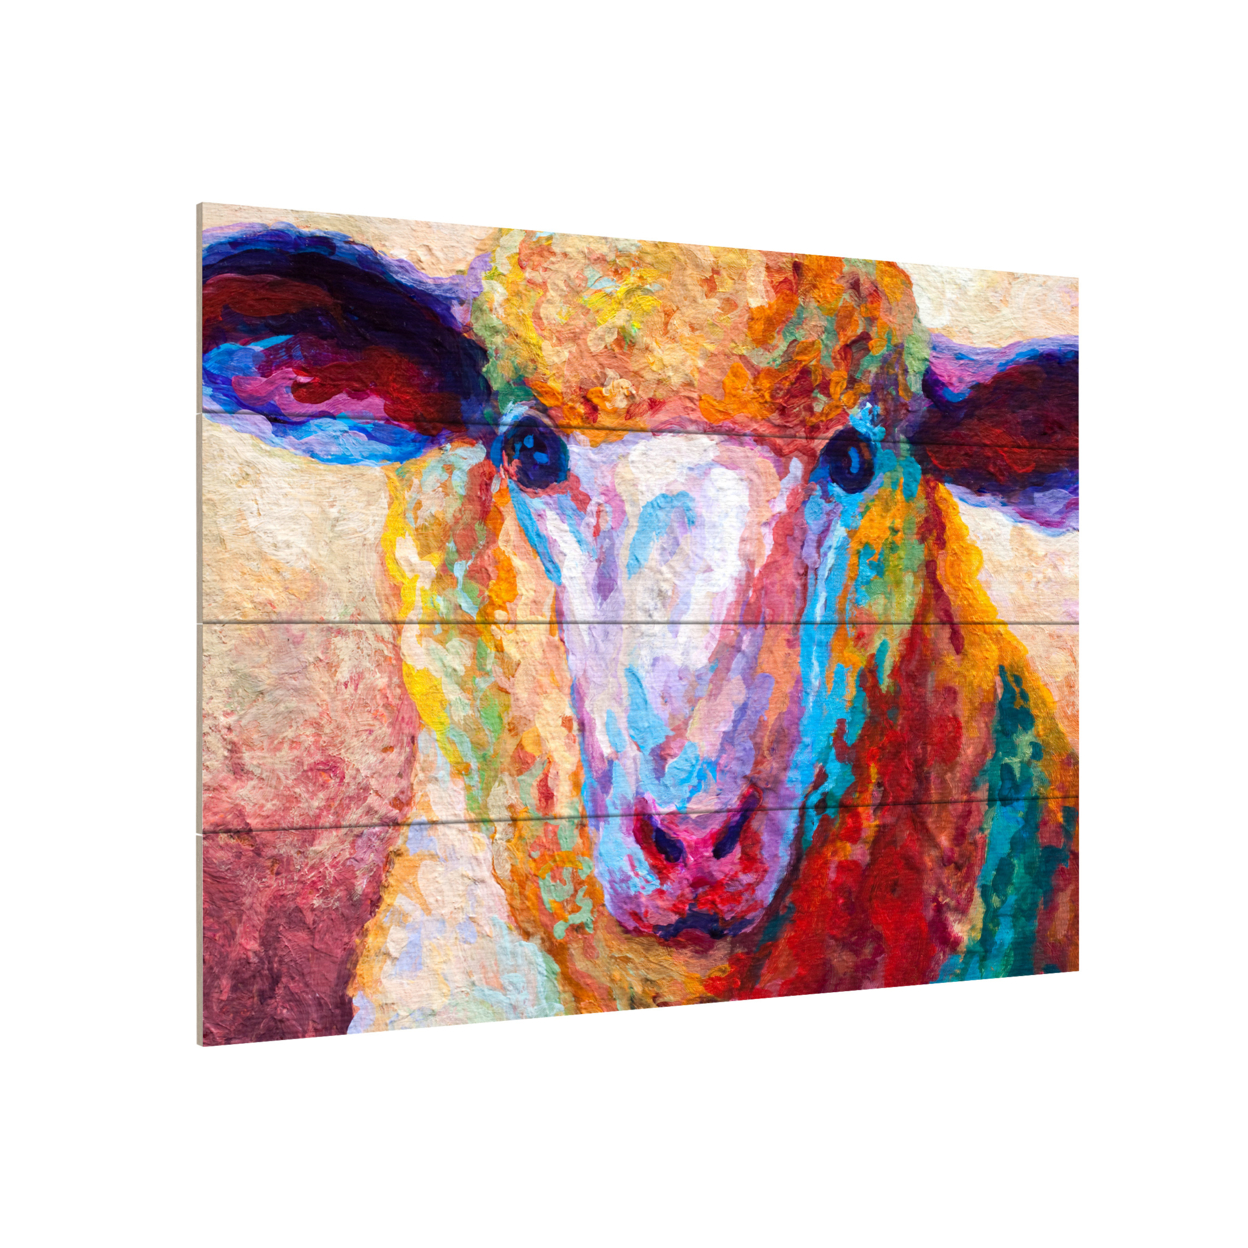 Wall Art 12 X 16 Inches Titled Dorset Ewe Ready To Hang Printed On Wooden Planks